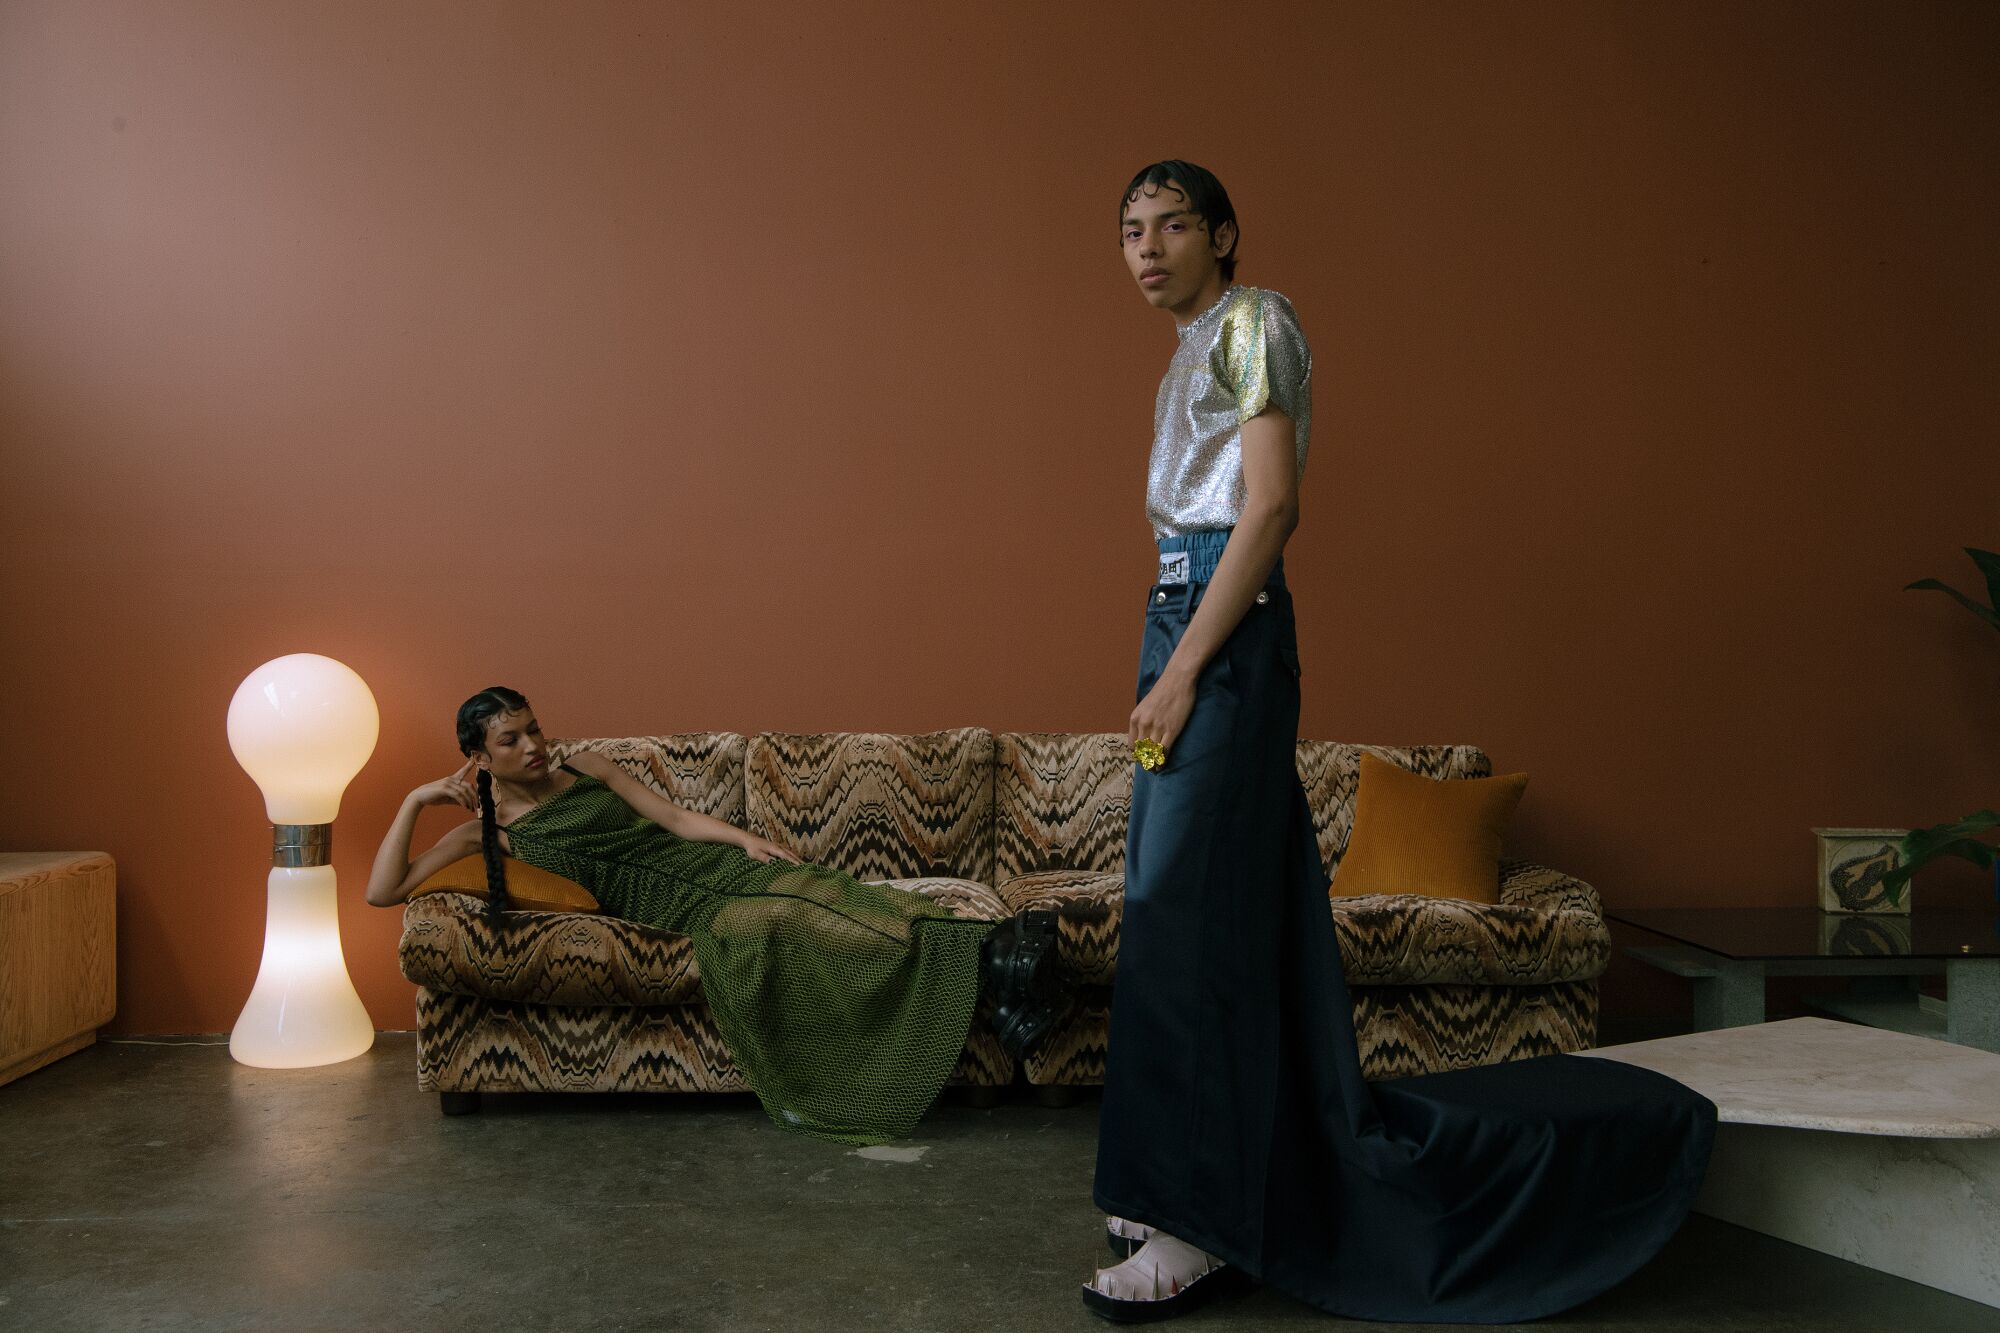 A model in a green dress lies on a couch, while another model stands in a long skirt that drapes over a coffee table.